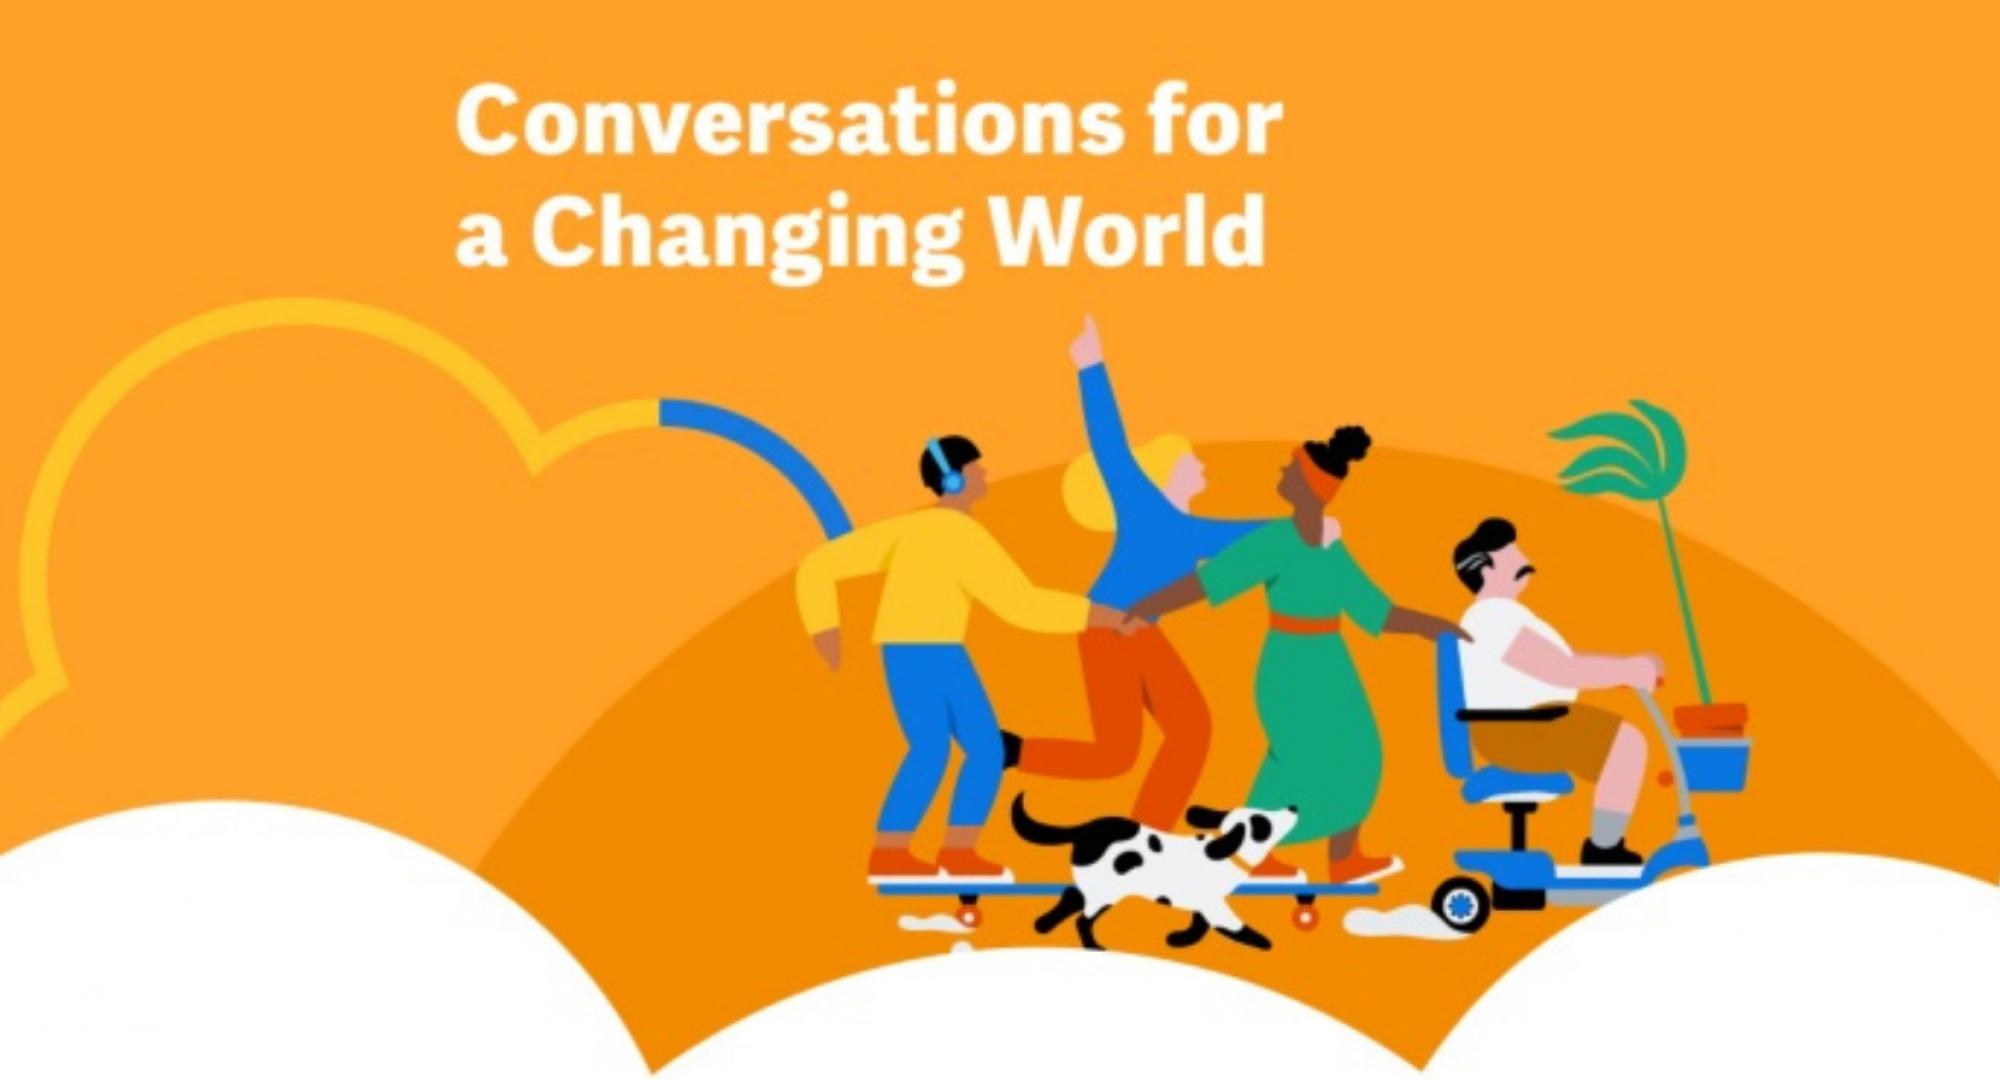 "Conversations for a changing world"